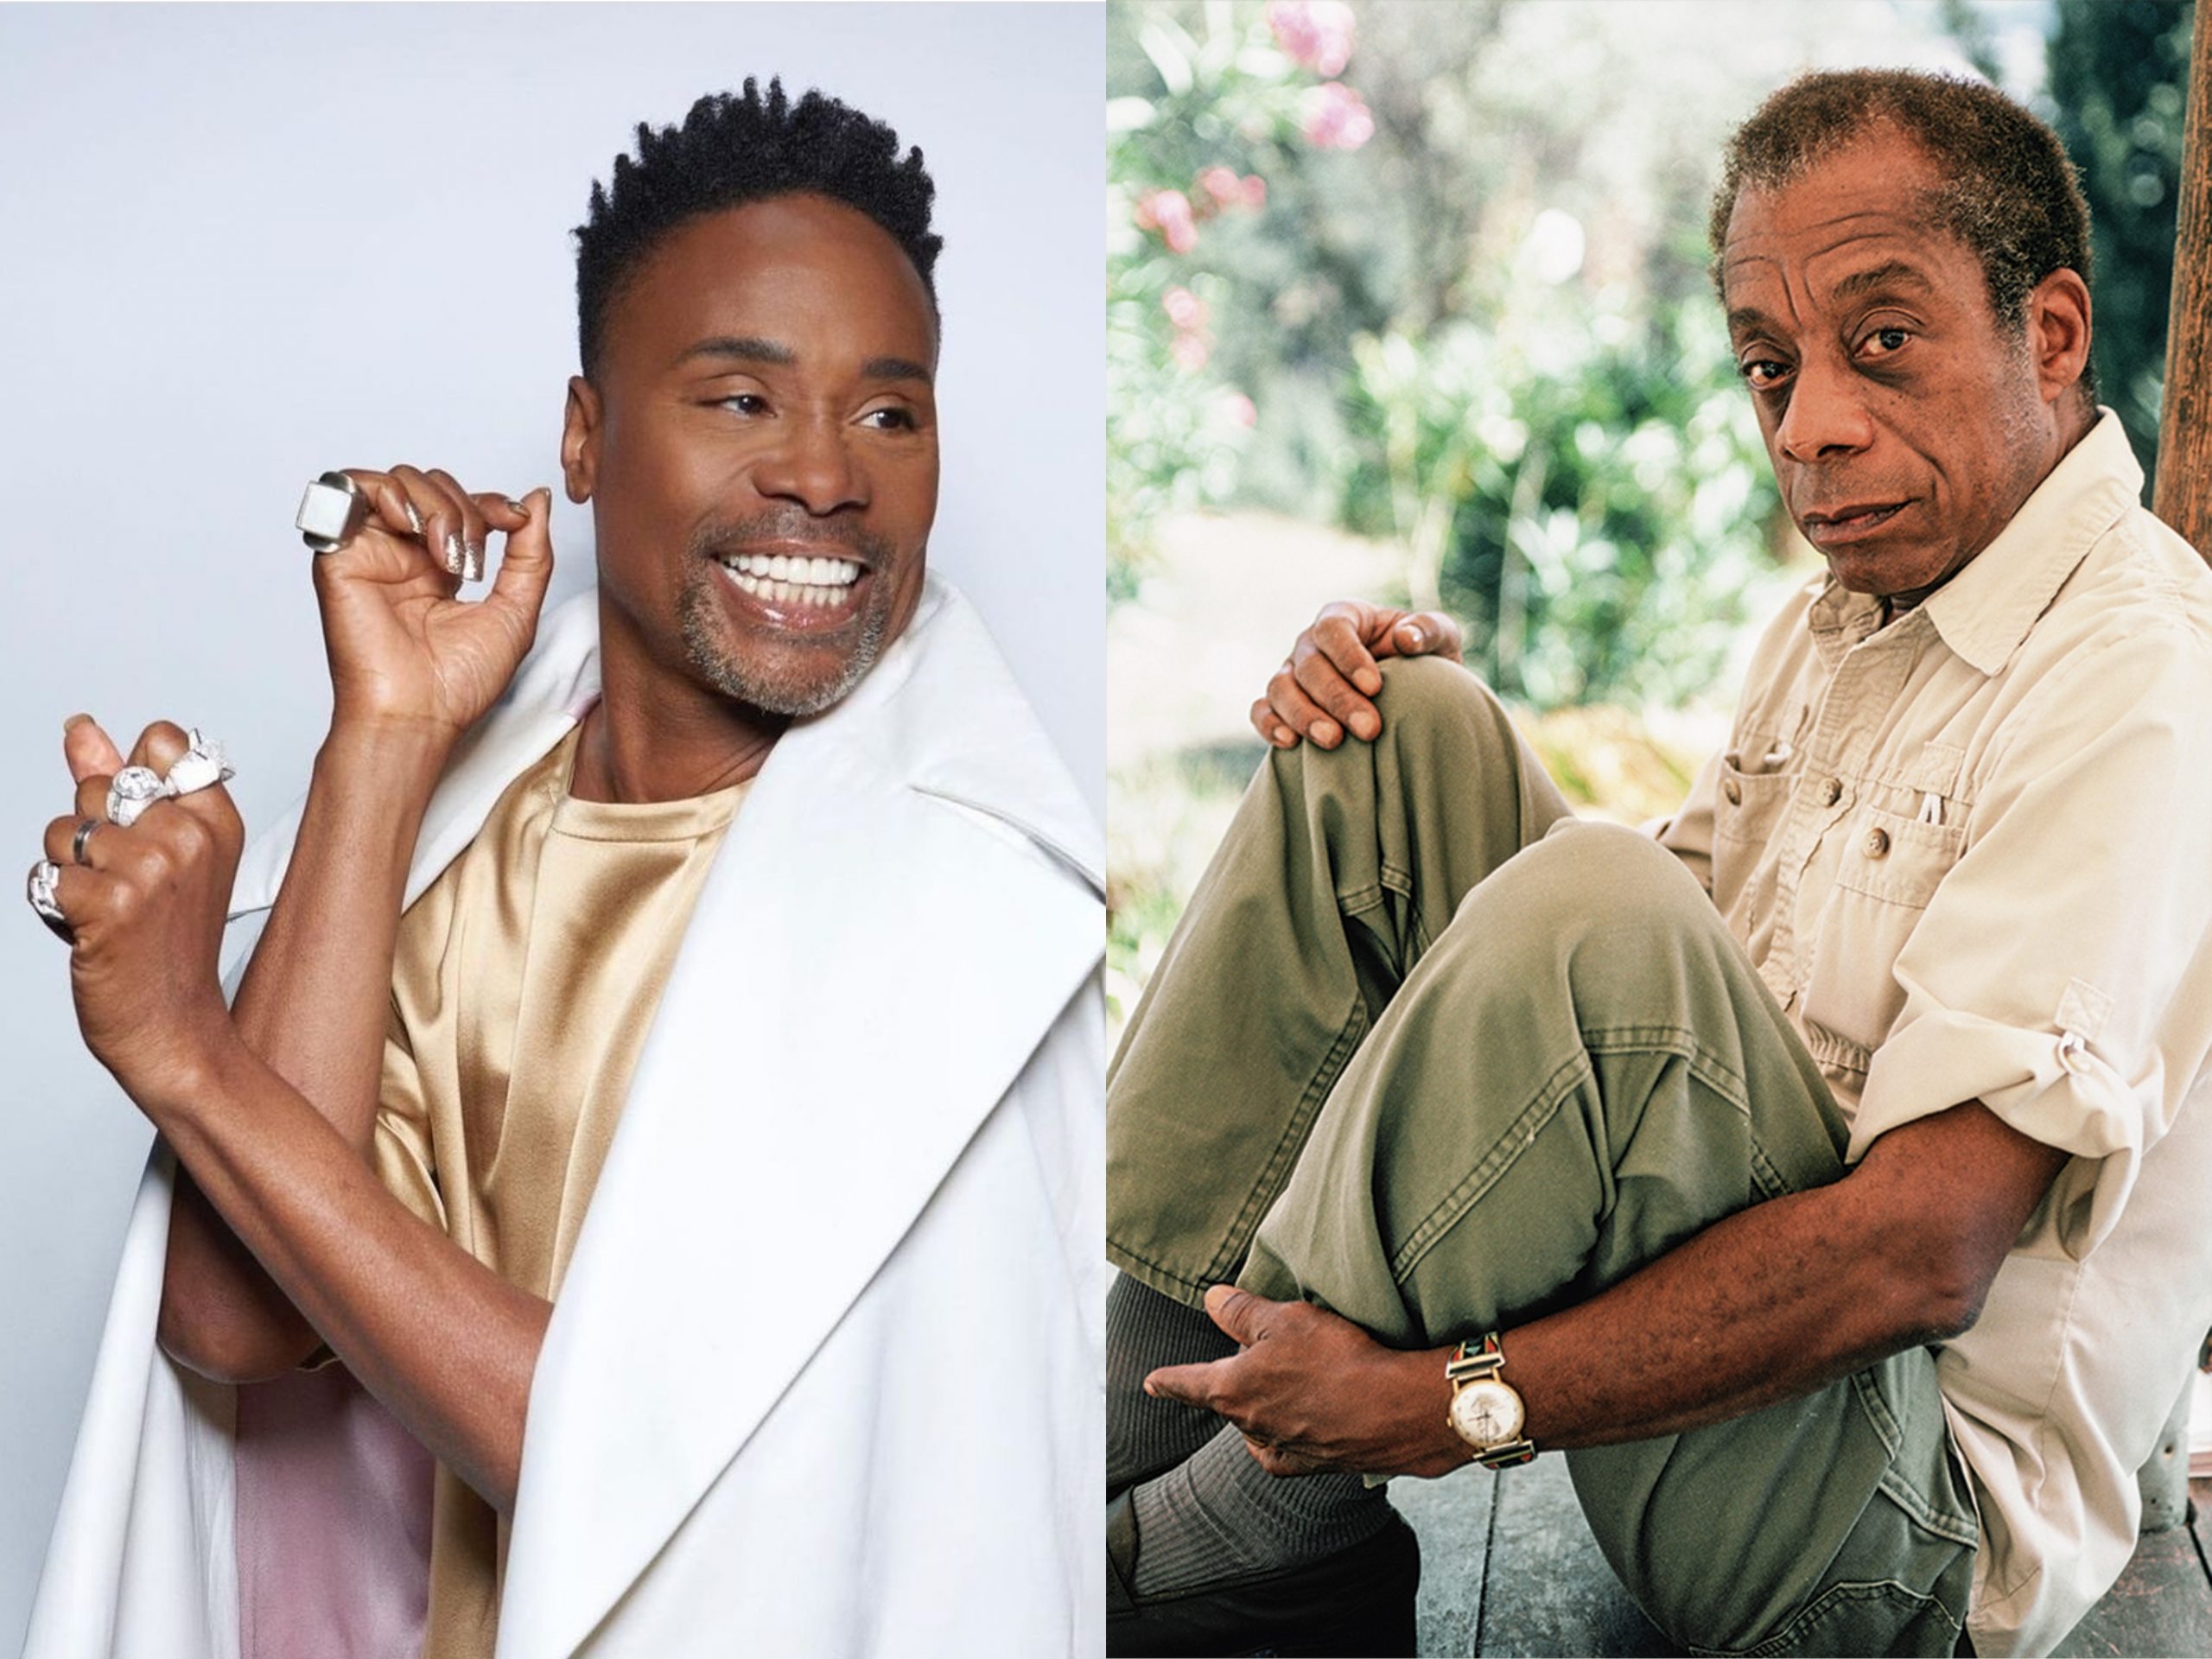 Billy Porter to Play James Baldwin in Biopic